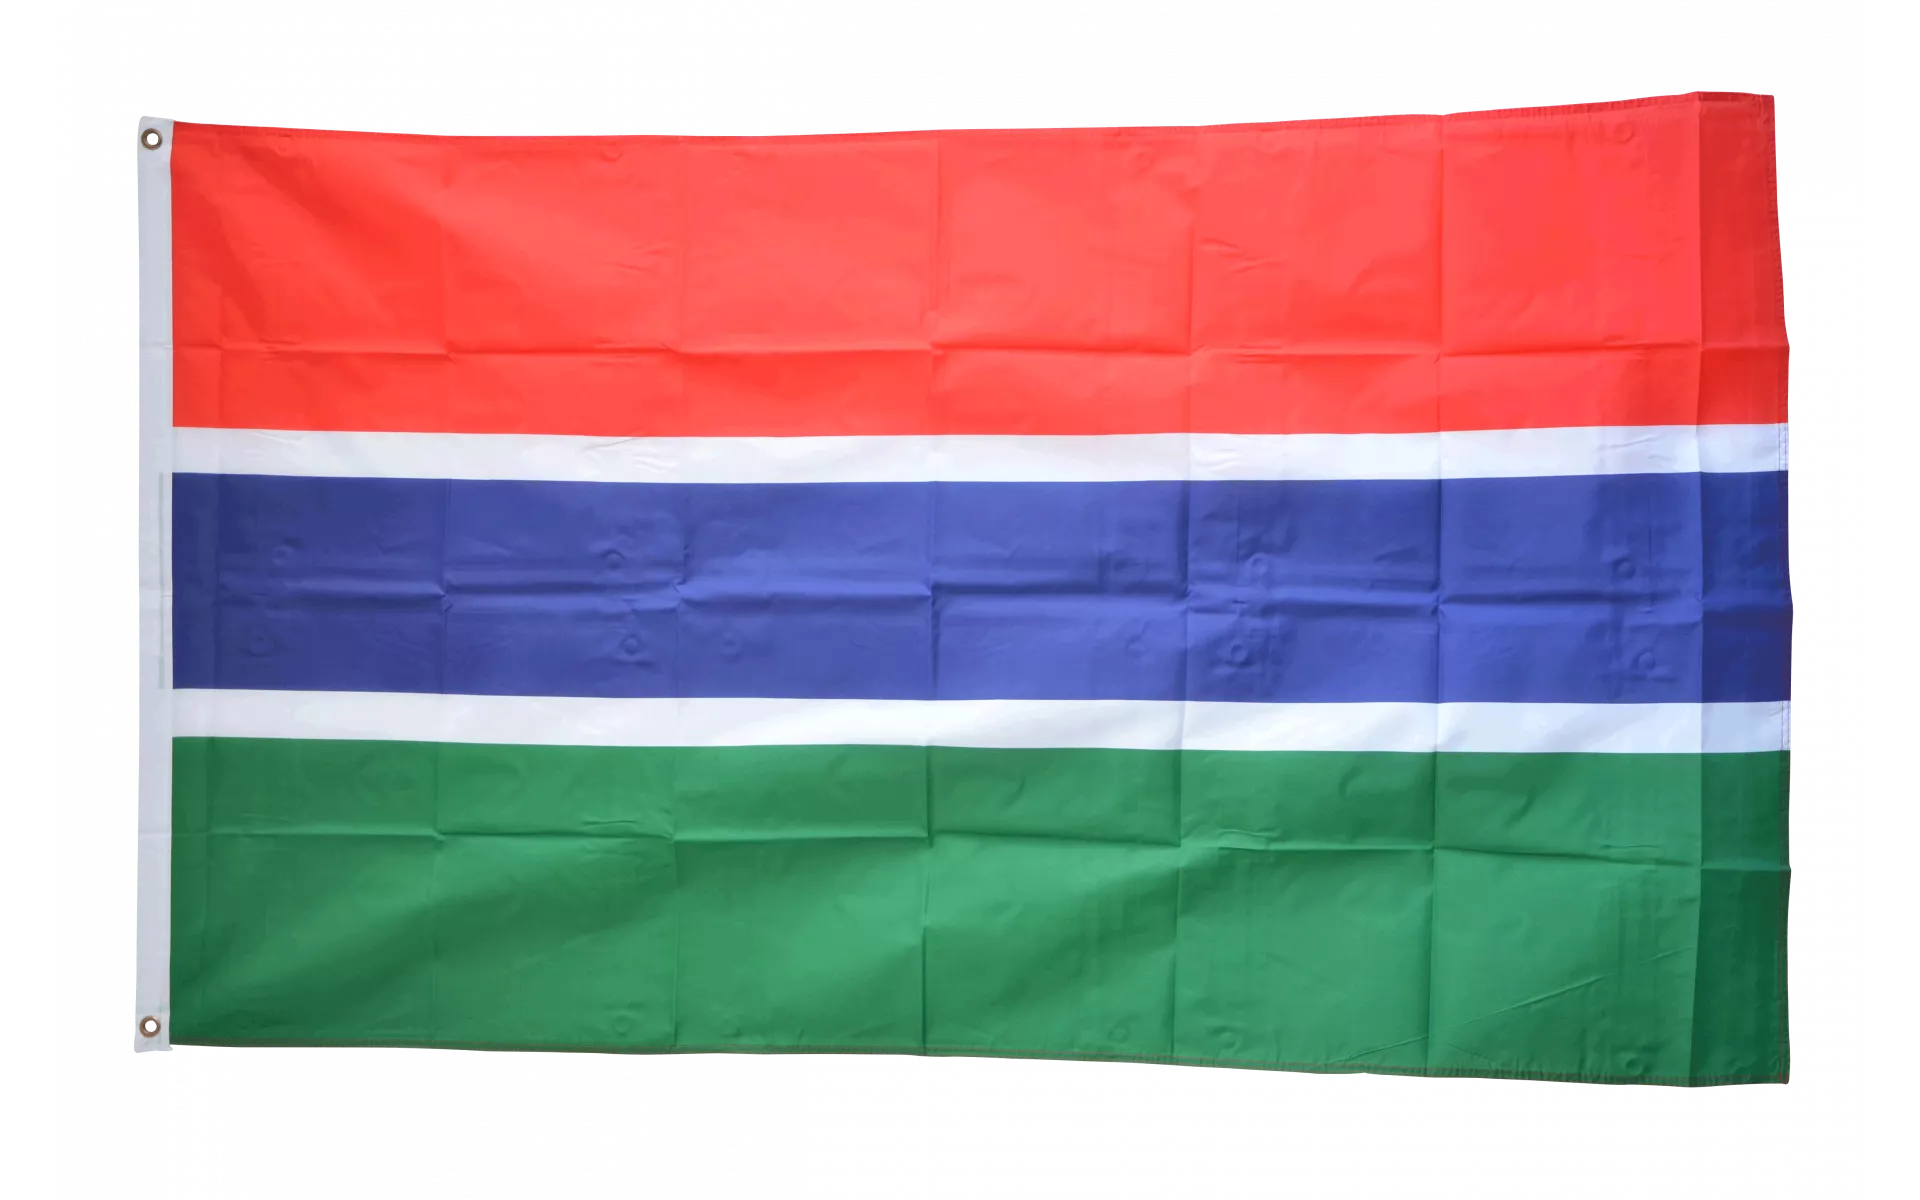 AUTO WAND FAHNE FLAGGE WIMPEL GAMBIA 13 X 15 CM 